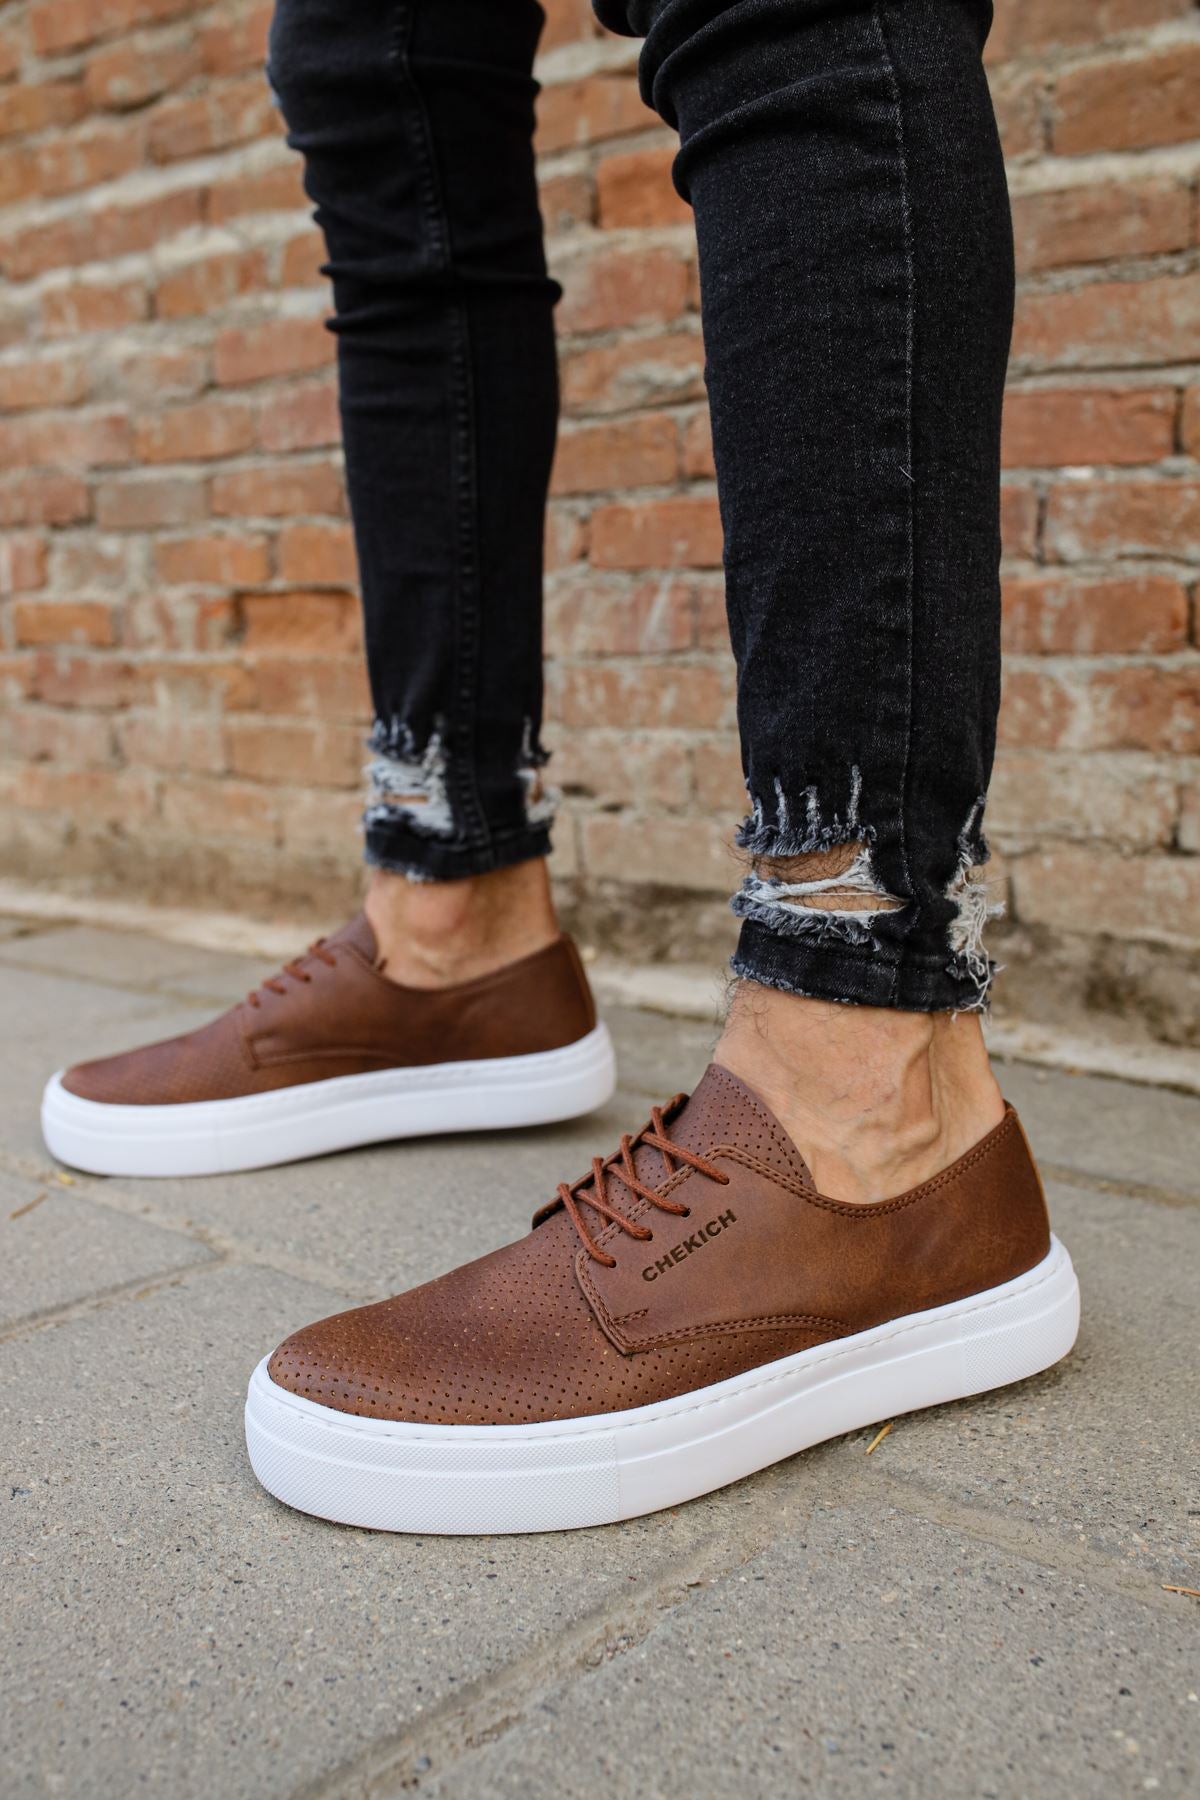 CH061 Men's Orthopedics Brown-White Sole Lace-up Casual Sneaker Shoes - STREETMODE ™